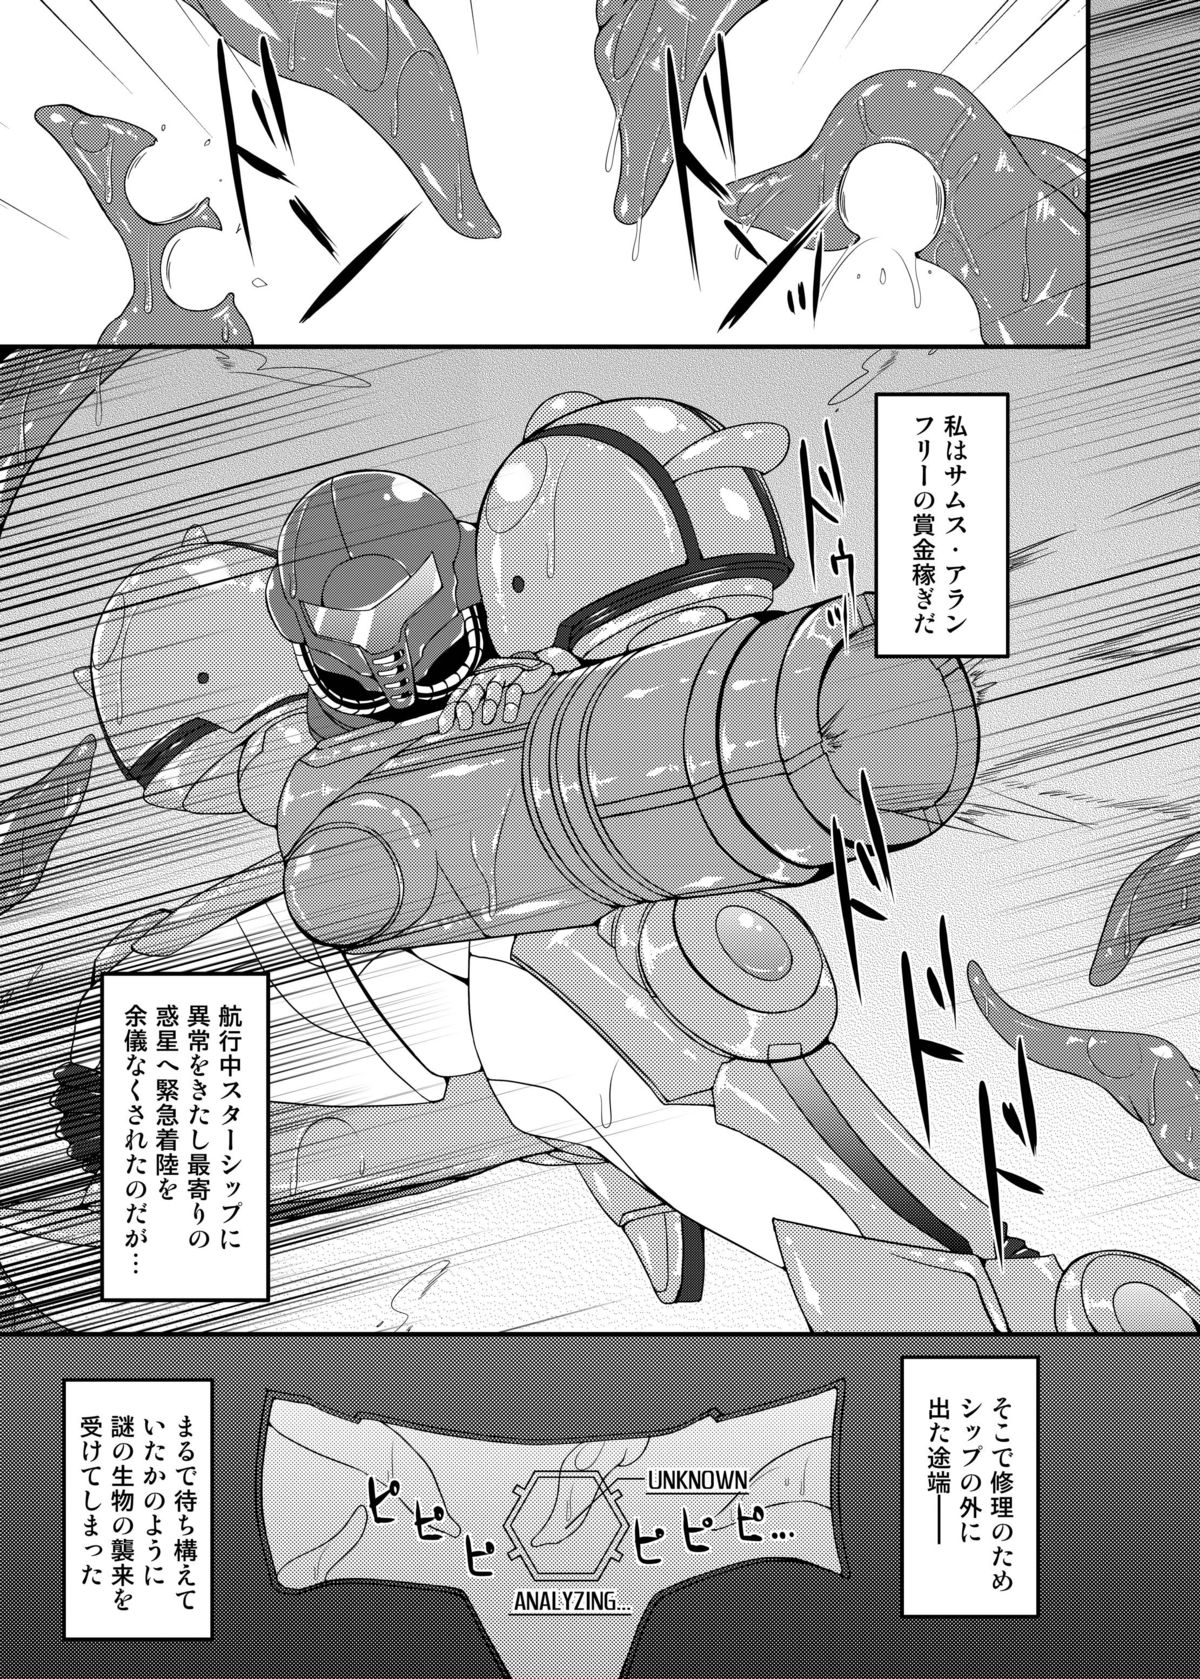 [Stapspats (Hisui)] S4A -Super Sexual Suit SAMUS Assaulted- (Metroid) [Digital] page 6 full